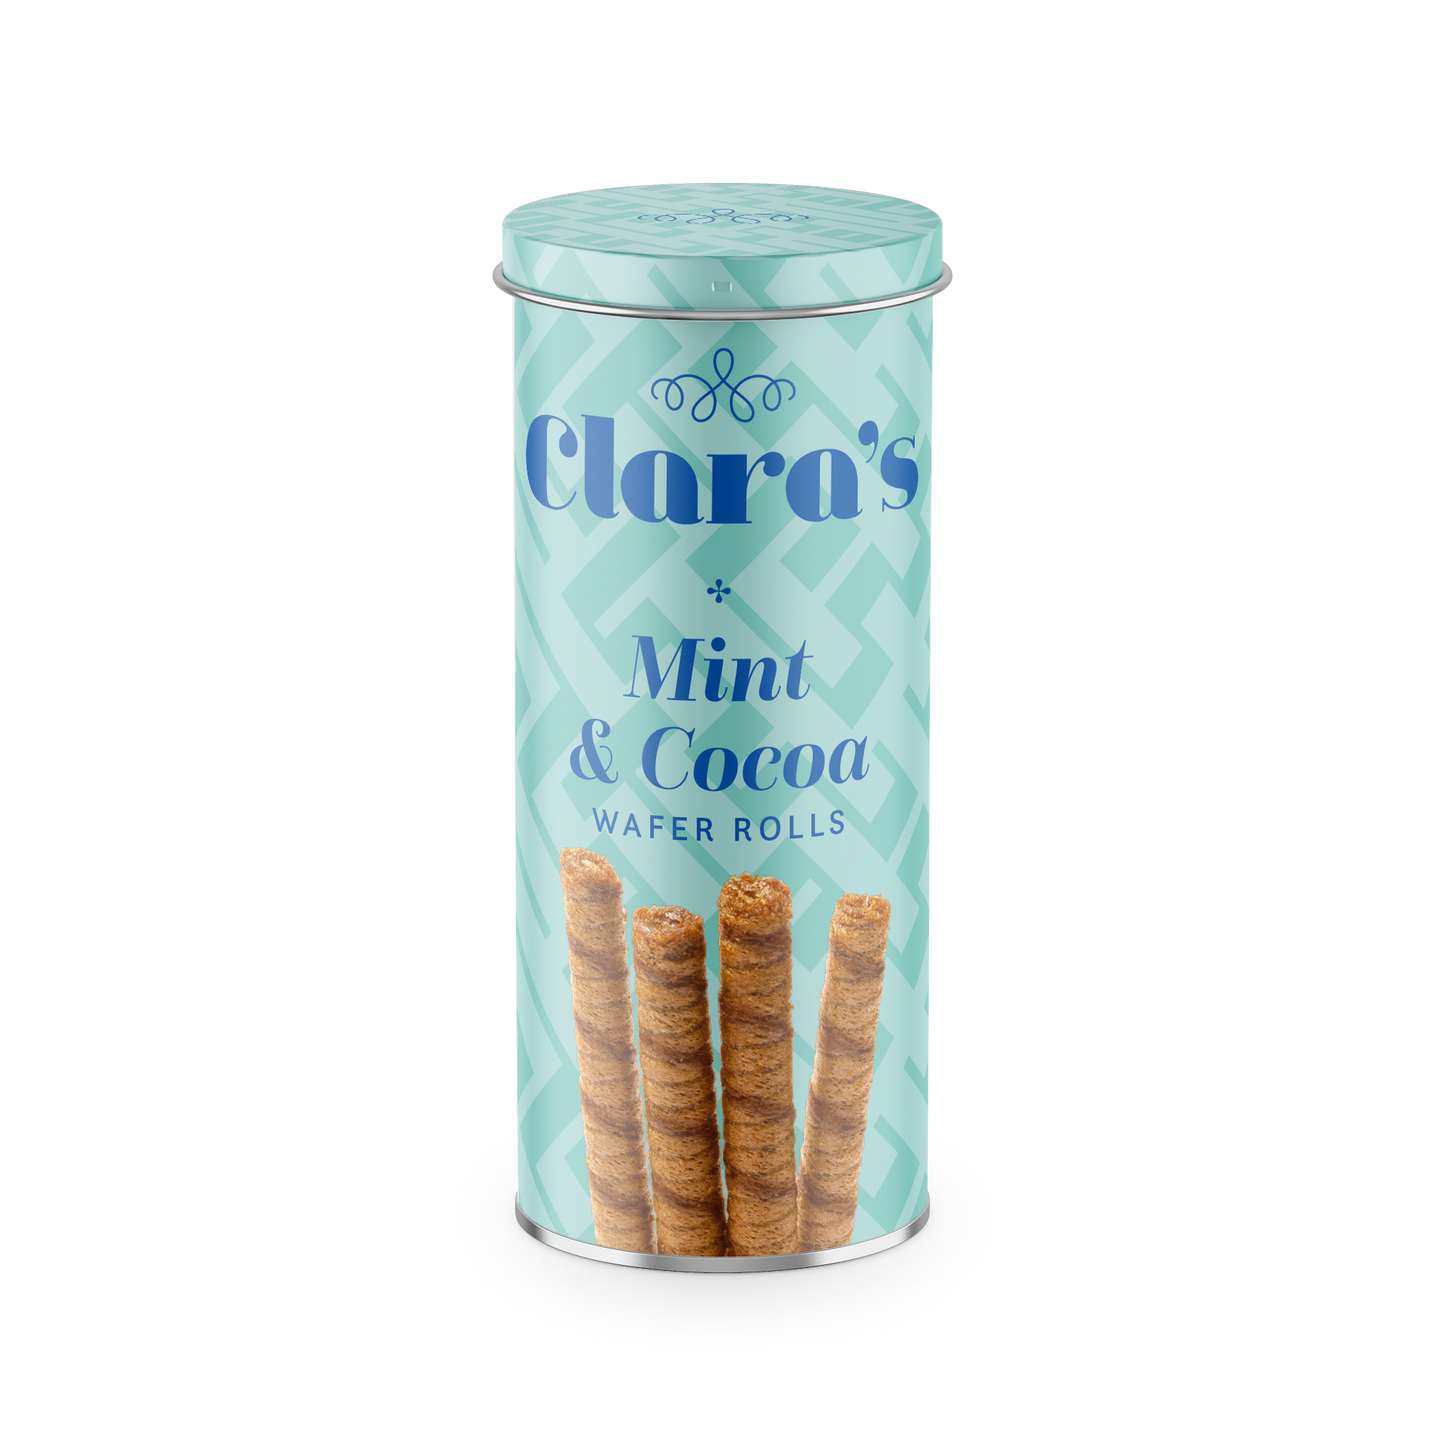 Clara's Selections Mint & Cocoa Wafer Rolls (130g)